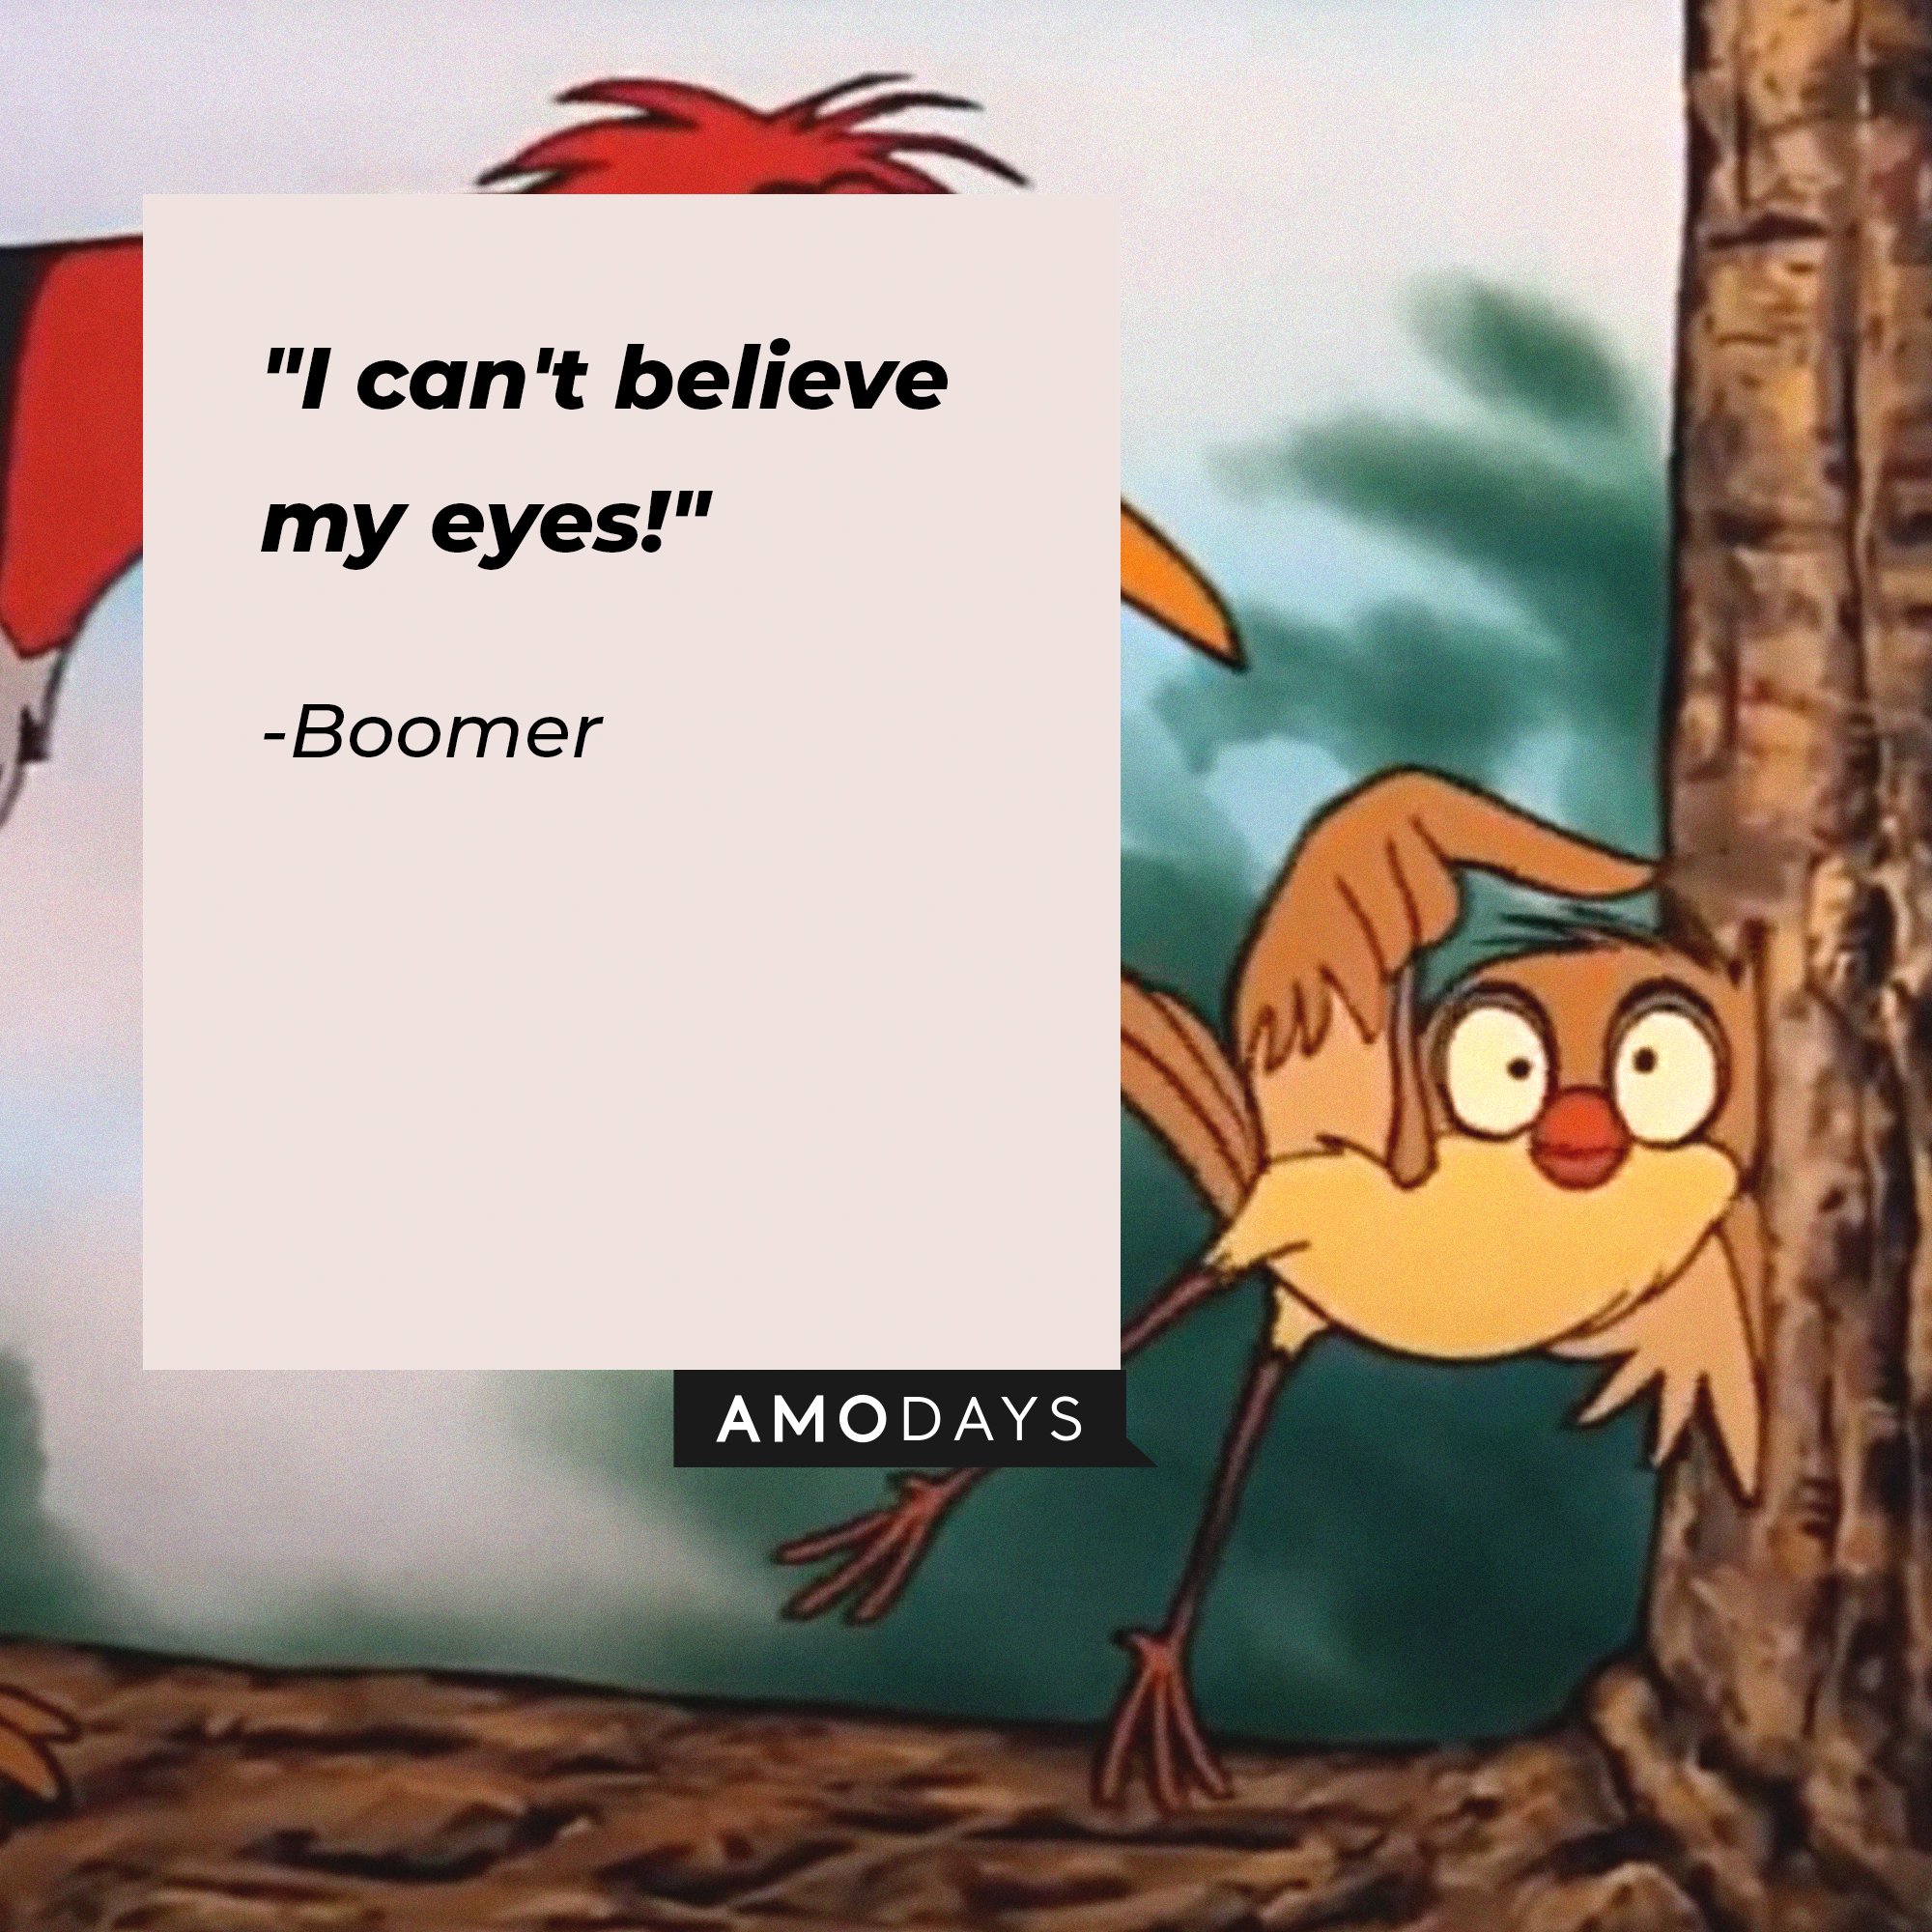 Boomer’s quote: "I can't believe my eyes!" | Image: AmoDays